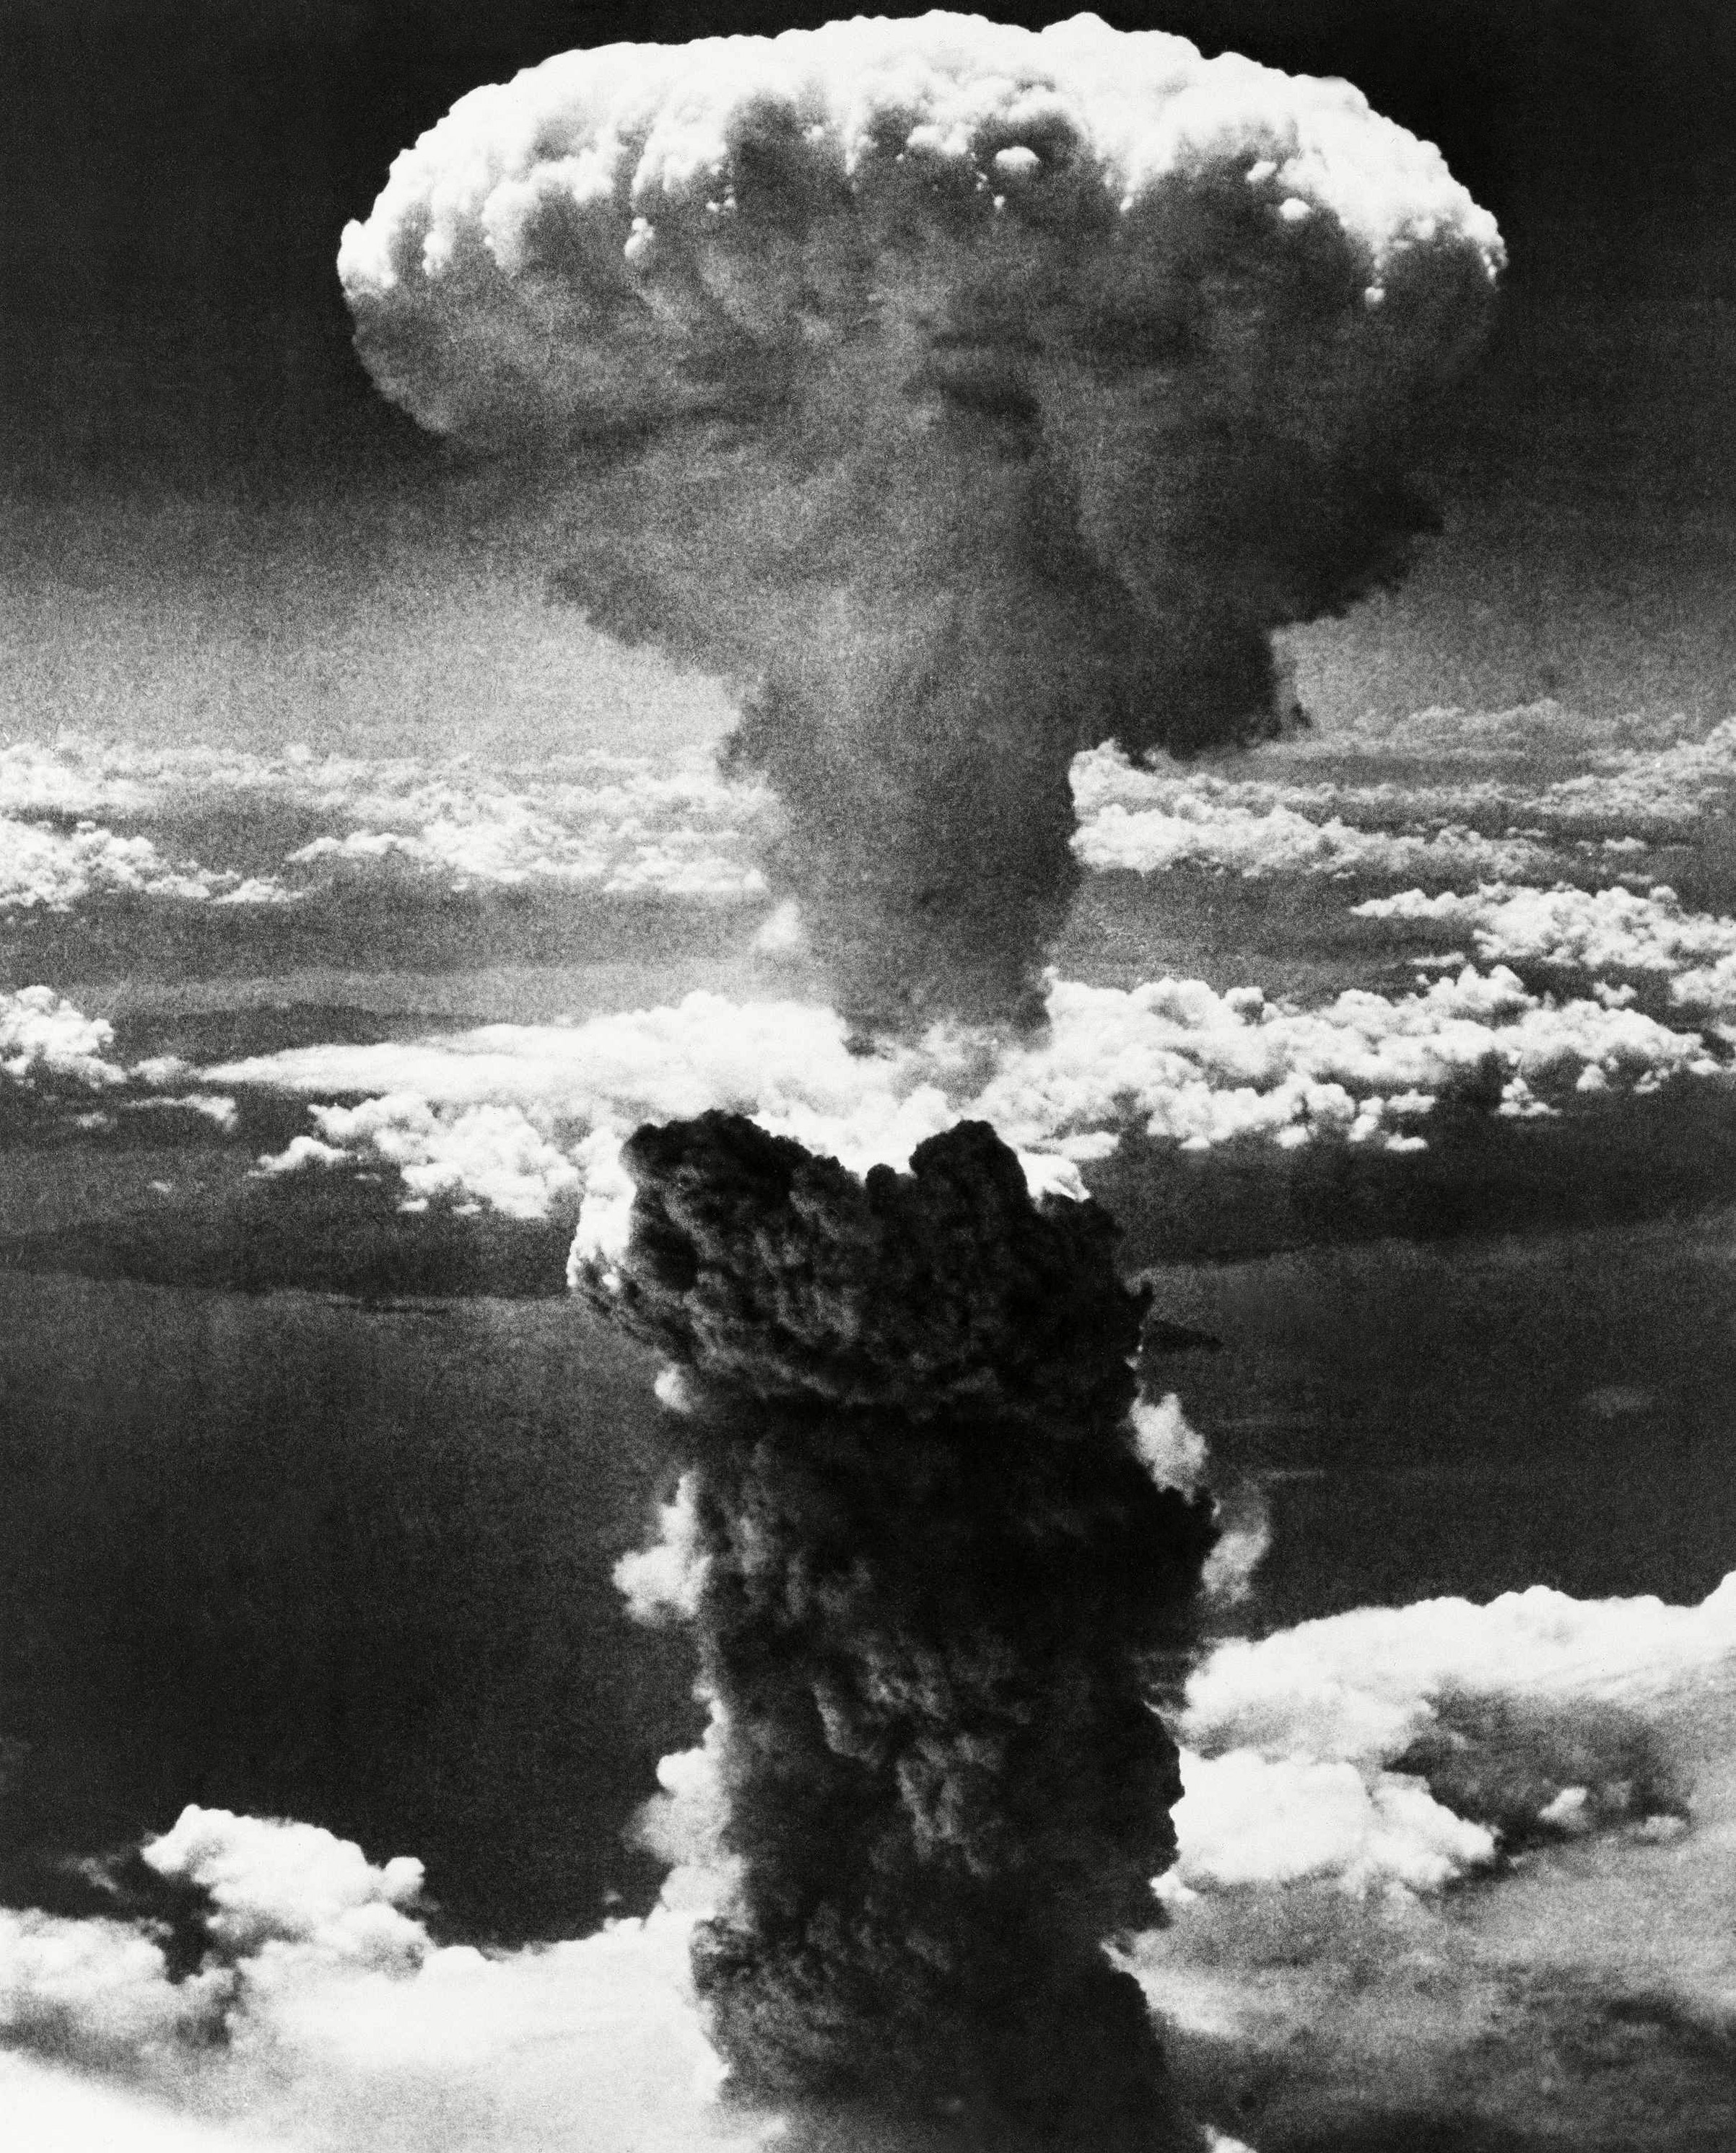 A mushroom cloud rises moments after the atomic bomb was dropped on the Japanese city of Nagasaki on Aug. 9, 1945, three days after the U.S. dropped an atomic bomb on Hiroshima. (AP—Shutterstock)